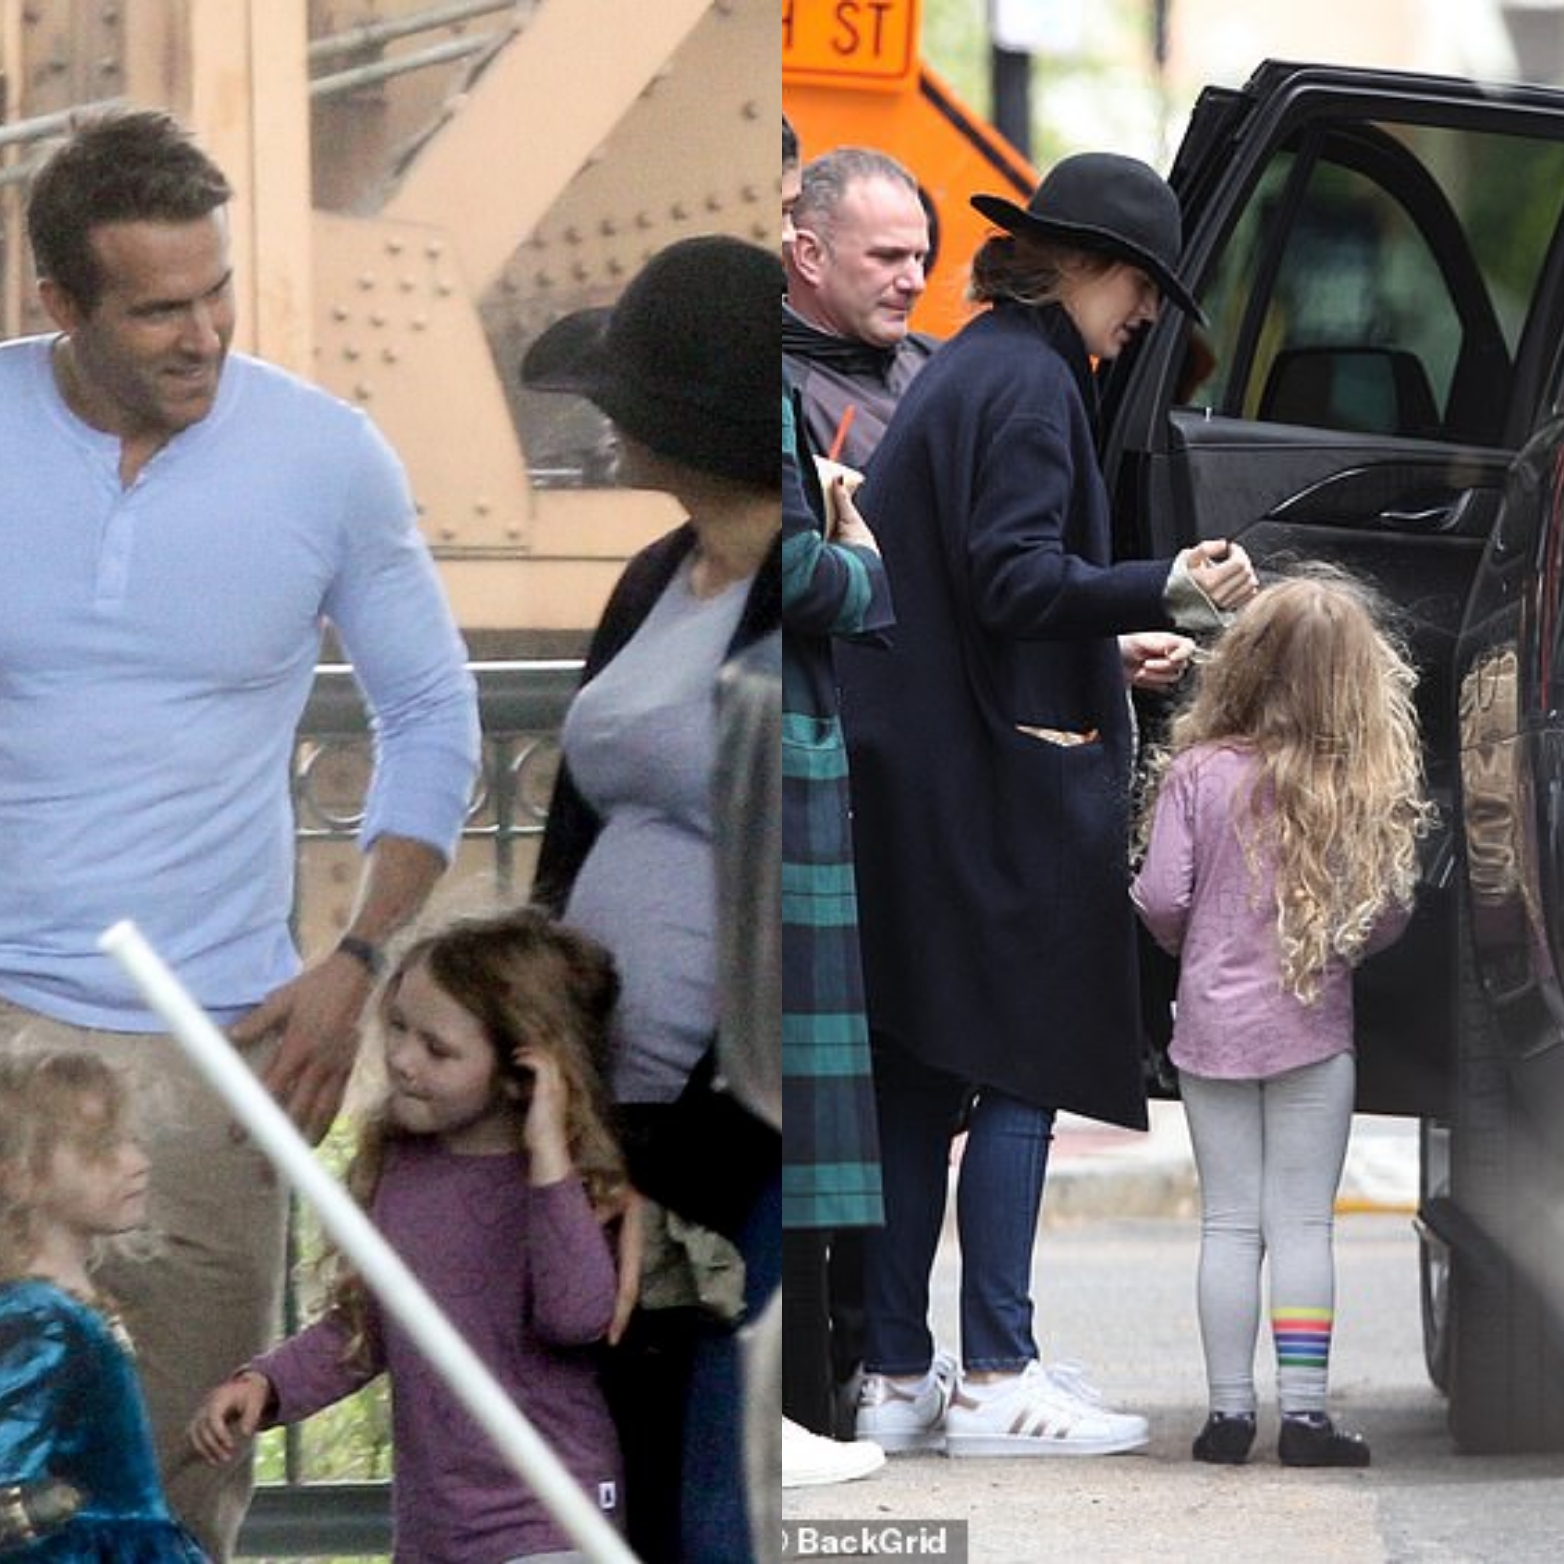 Blake Lively and her daughters visit Ryan Reynolds on set 5/25/19